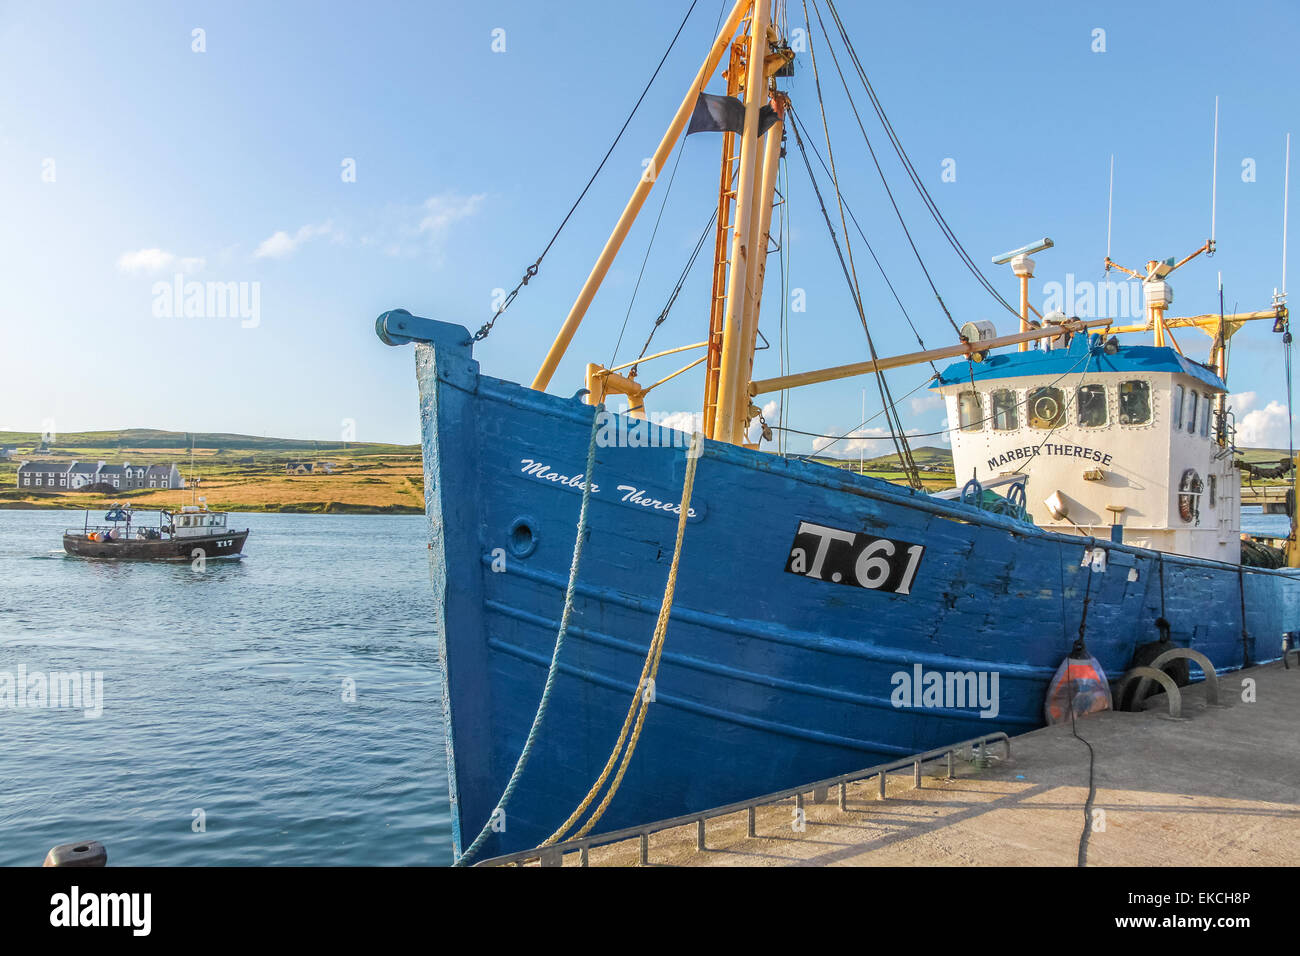 Blue fishing boat in the port of Portmagee, County Kerry, Ireland Stock Photo